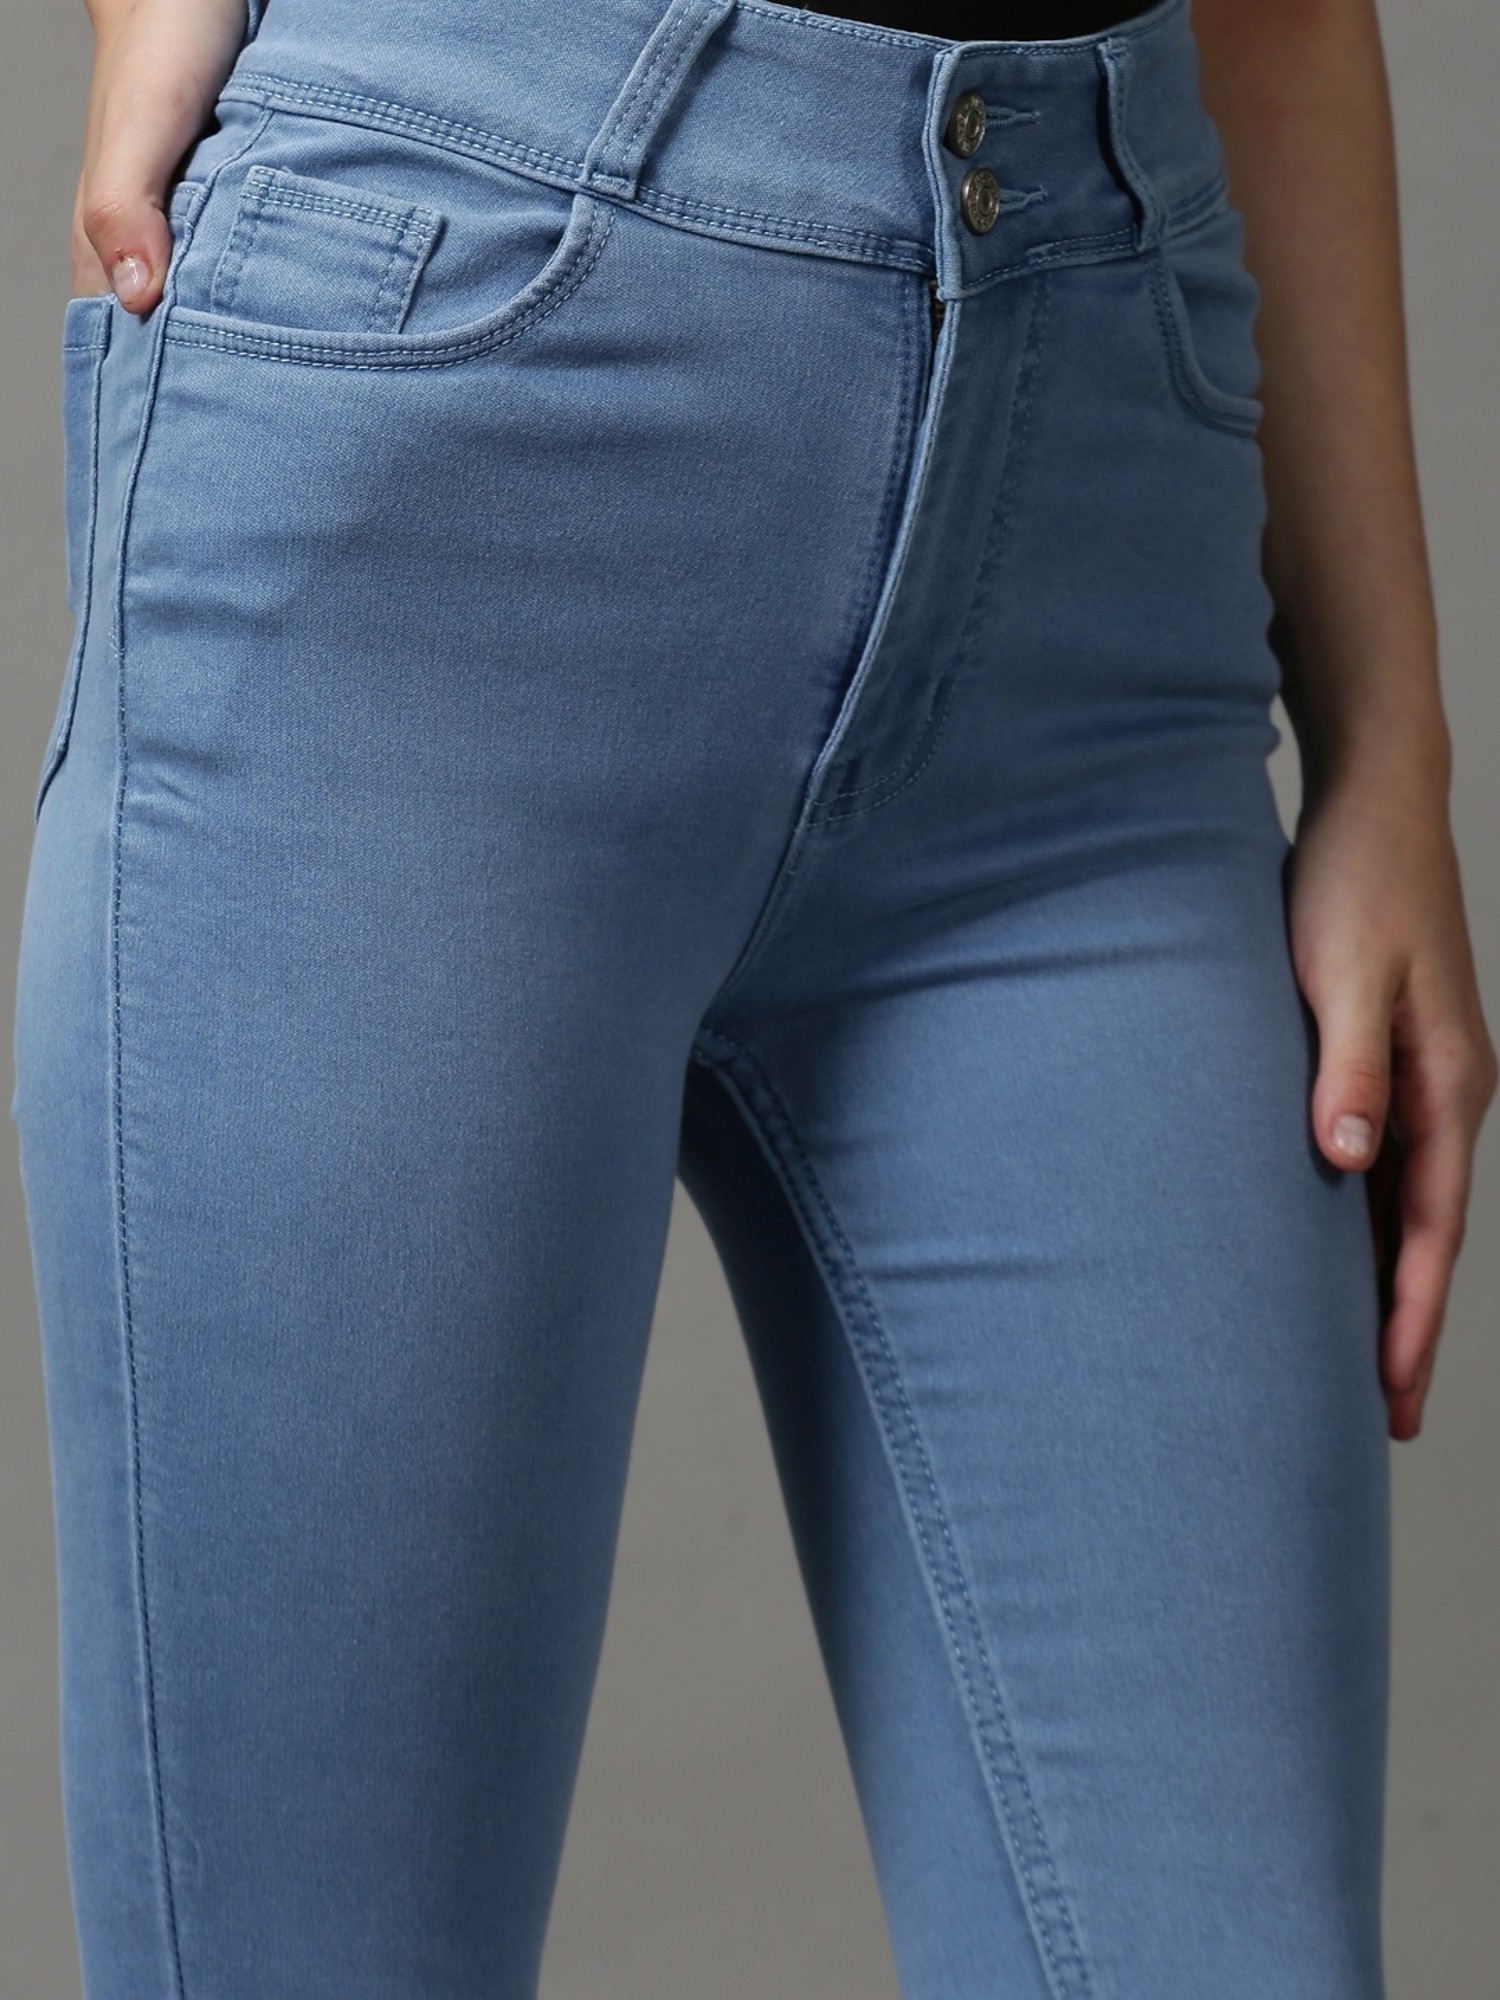 Update more than 179 low waist jeans for ladies best